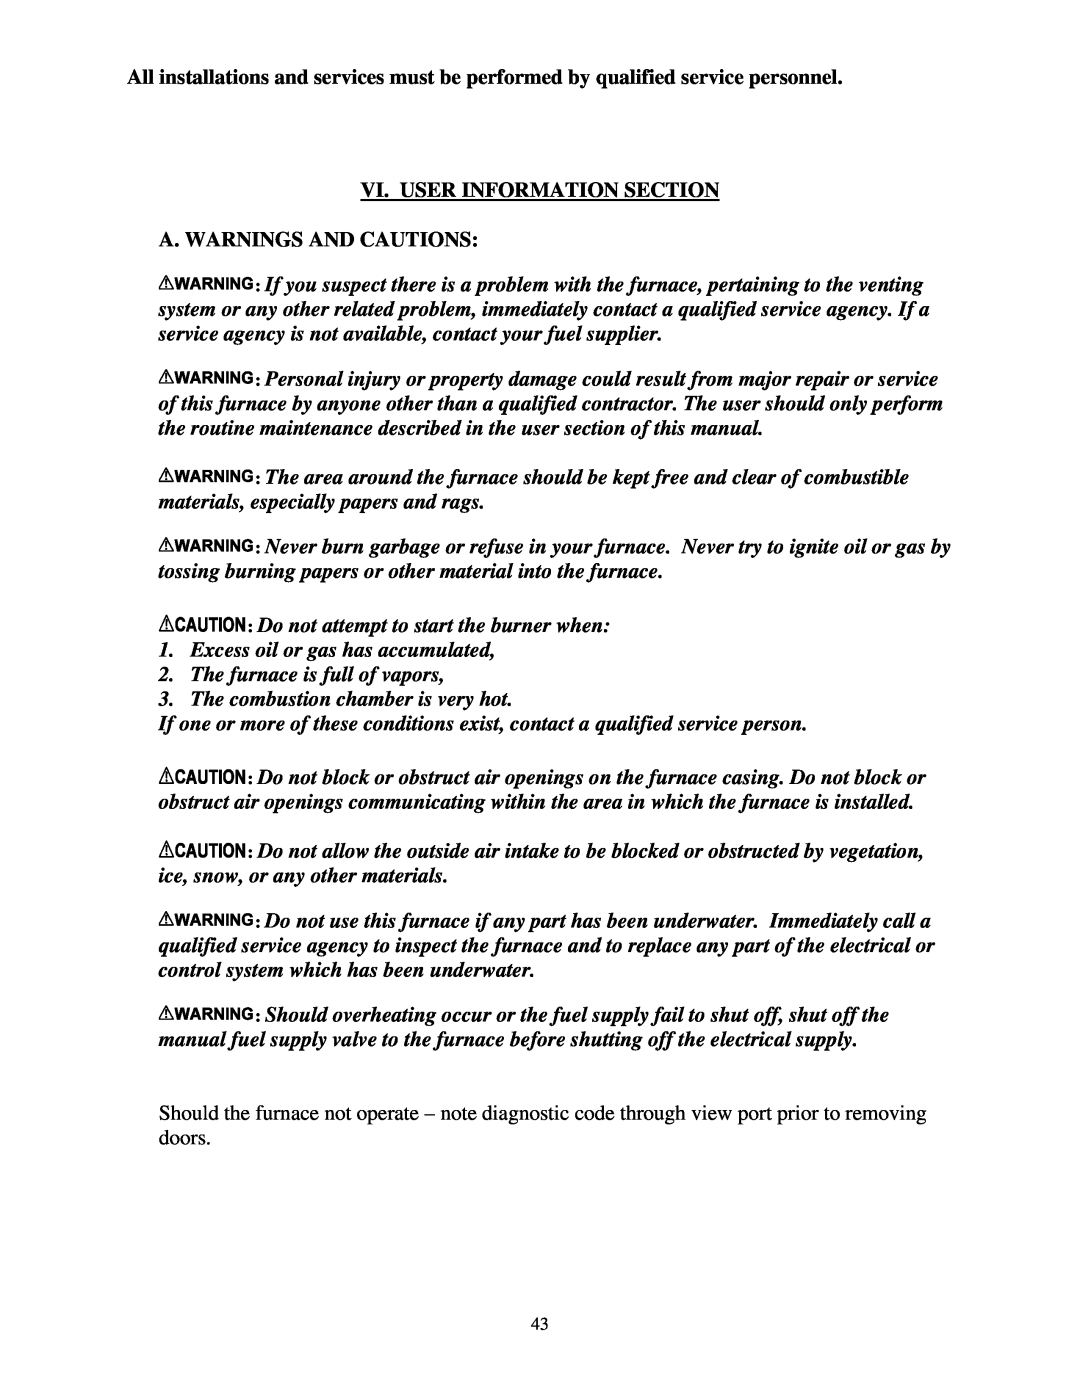 Thermo Products omd-70 service manual Vi. User Information Section, A. Warnings And Cautions 